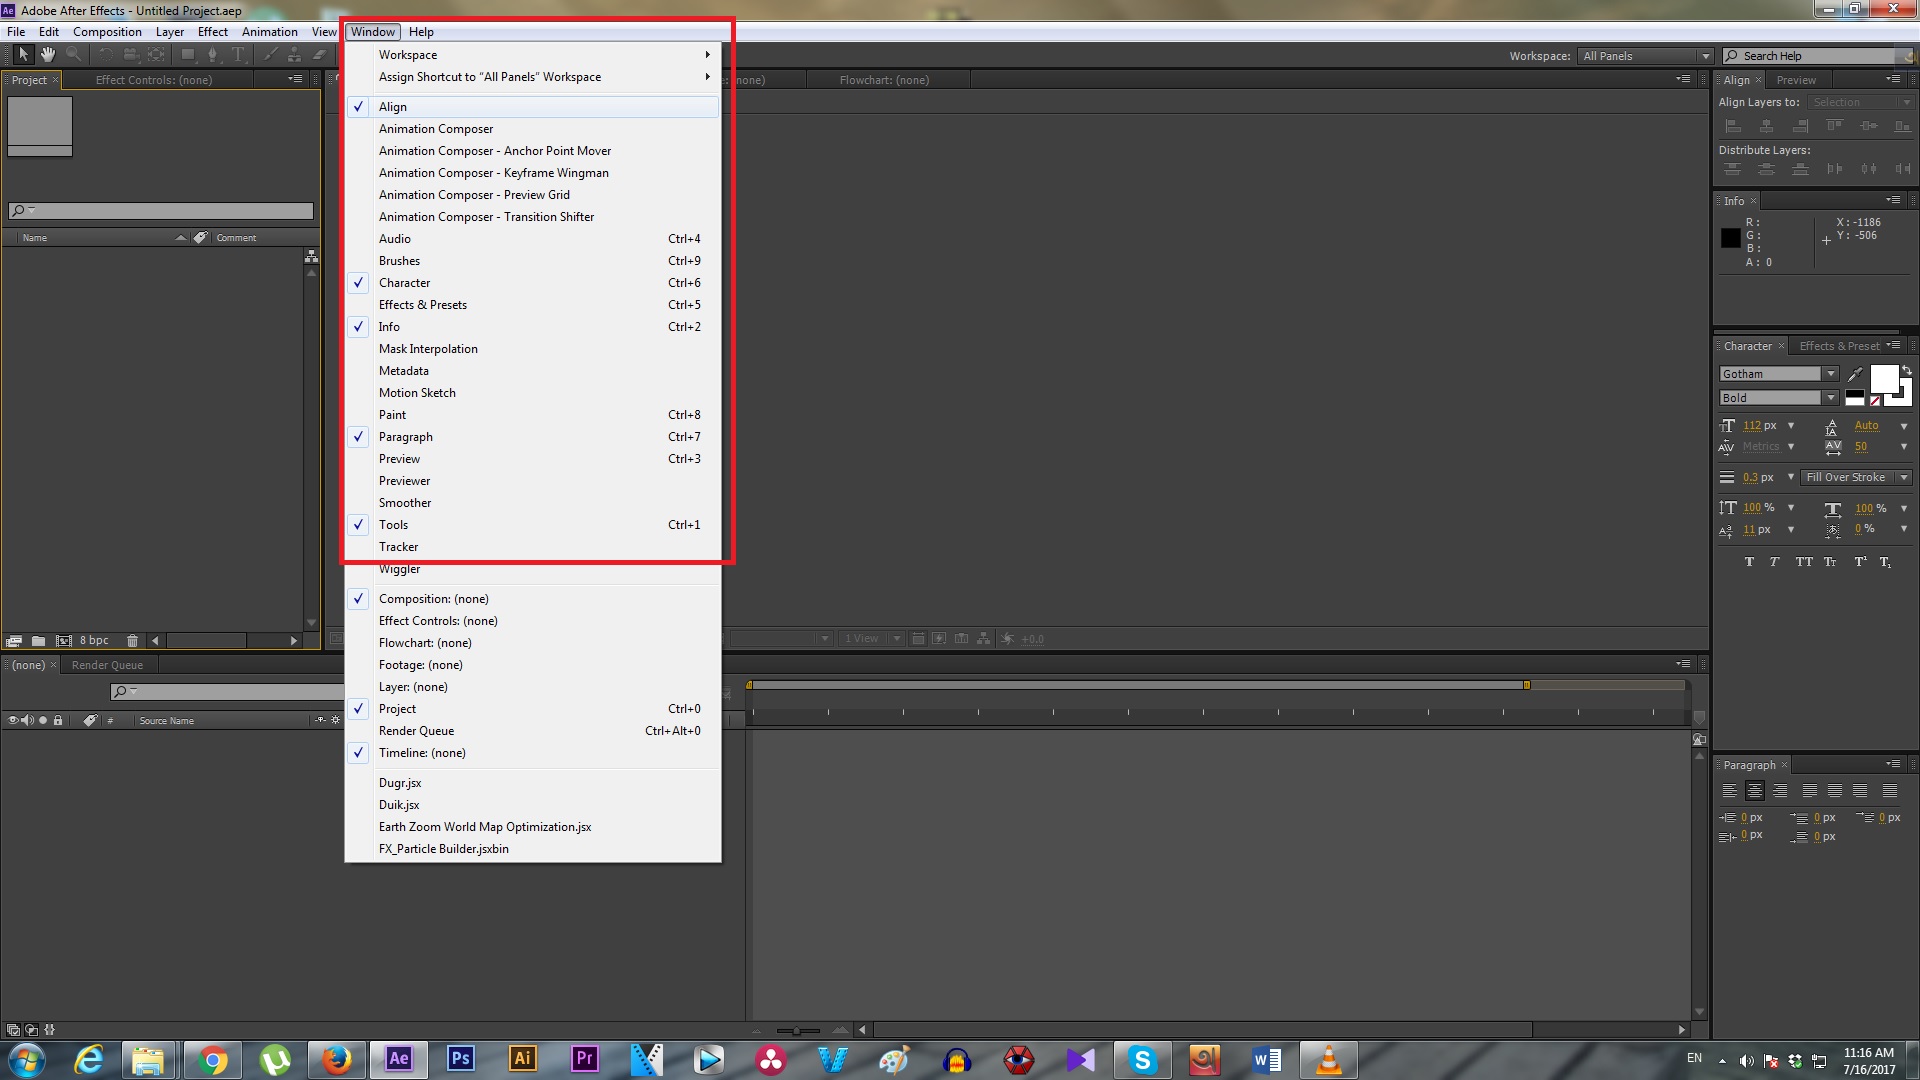 what features does adobe after effect cs6 jave